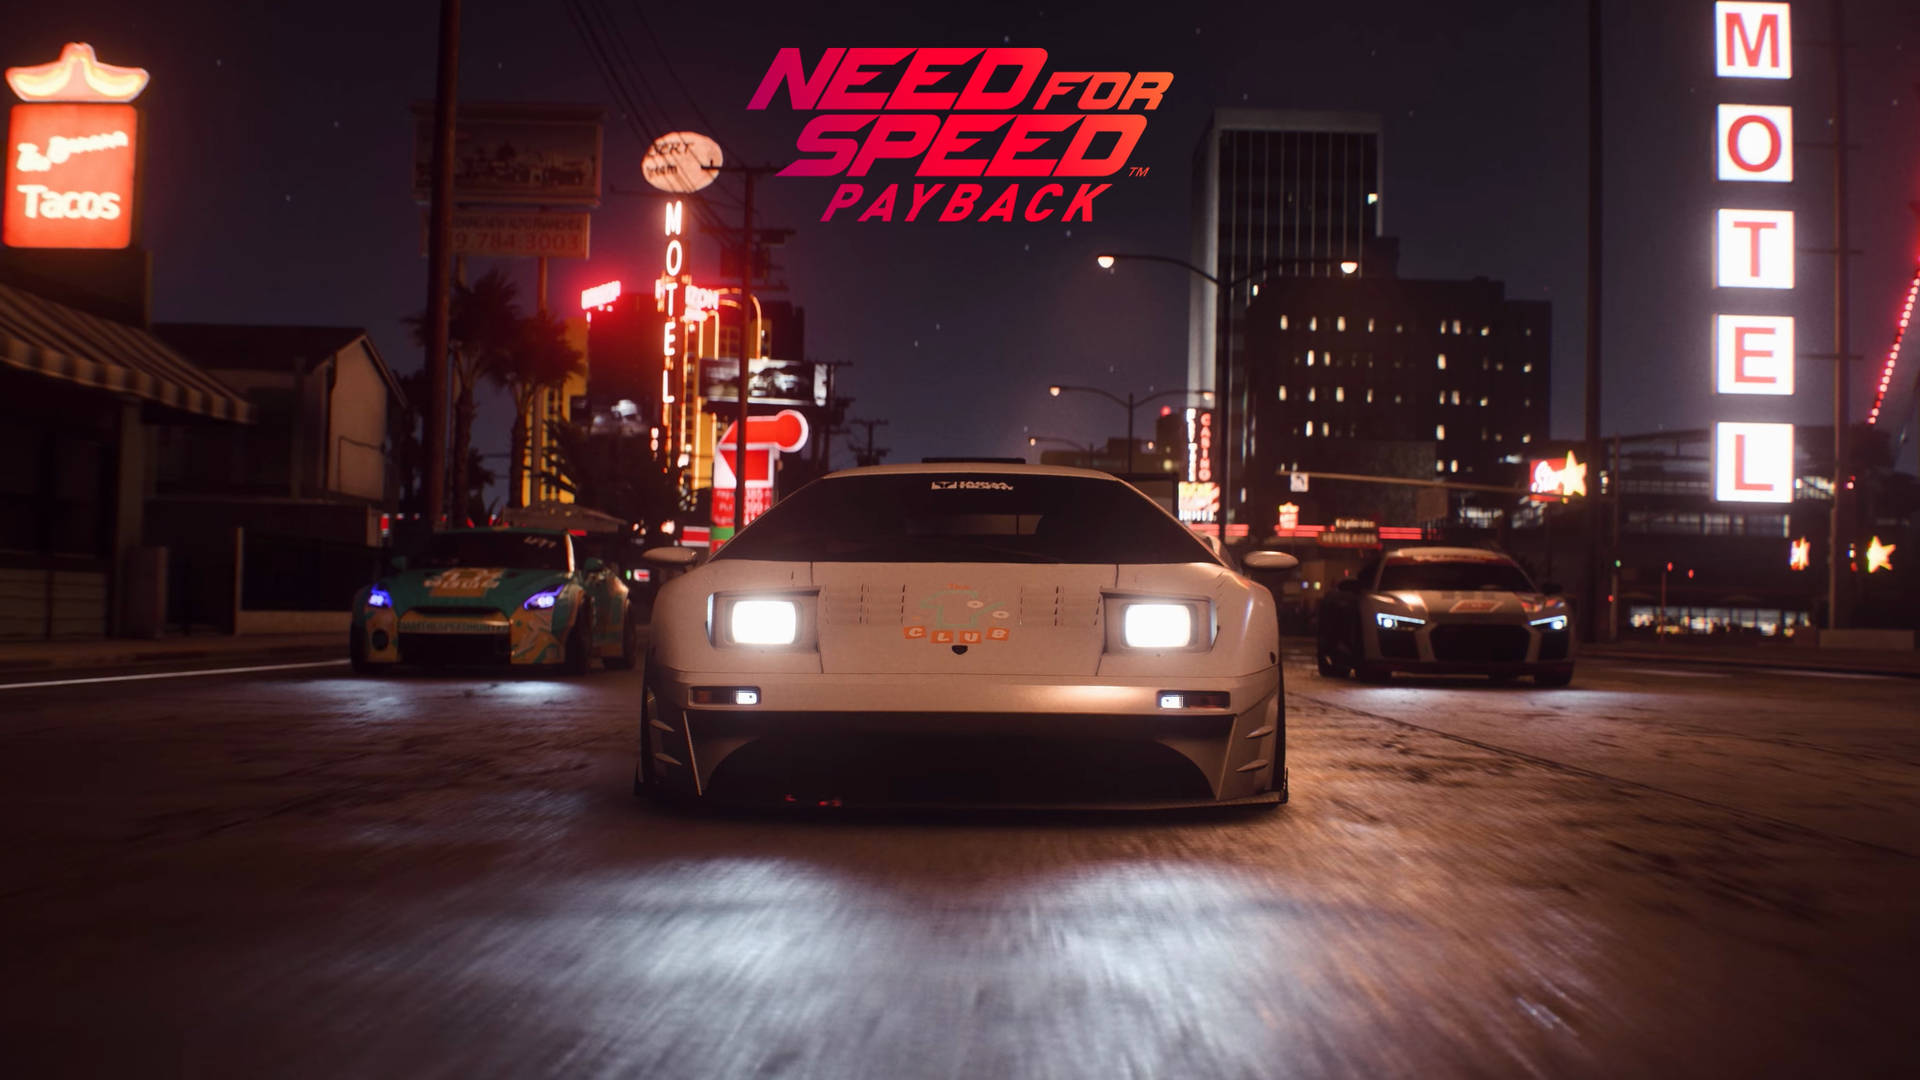 Stock Image: Intense Night Race in Need for Speed Payback Wallpaper